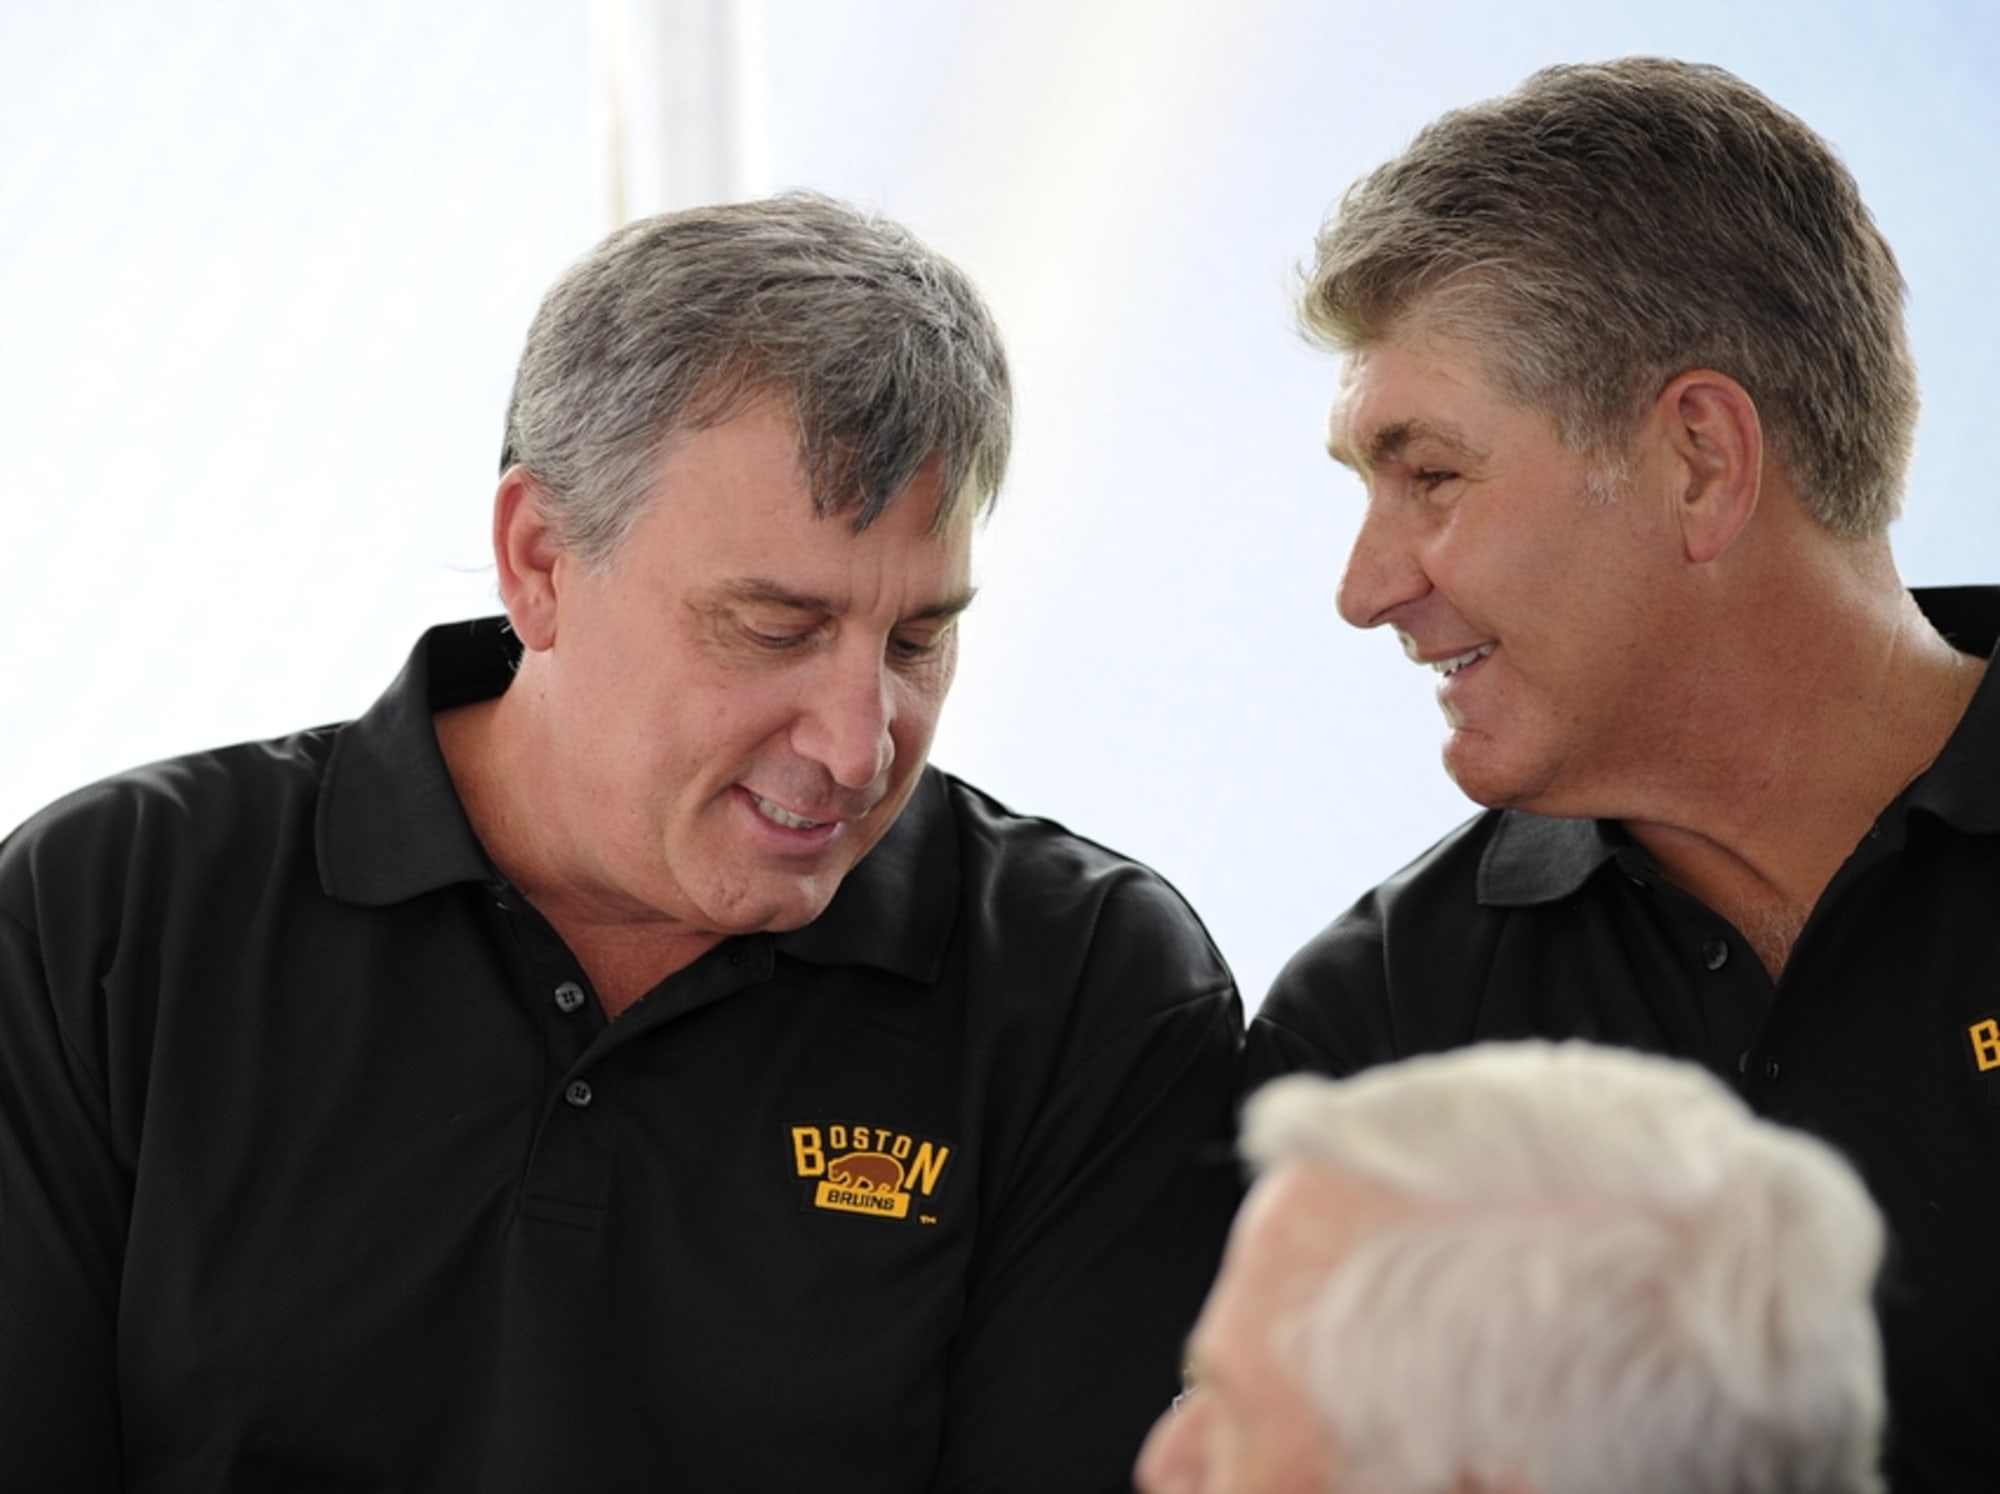 Ads on NHL jerseys are coming, but Bruins will insist on 'the right fit,'  says Cam Neely - The Boston Globe